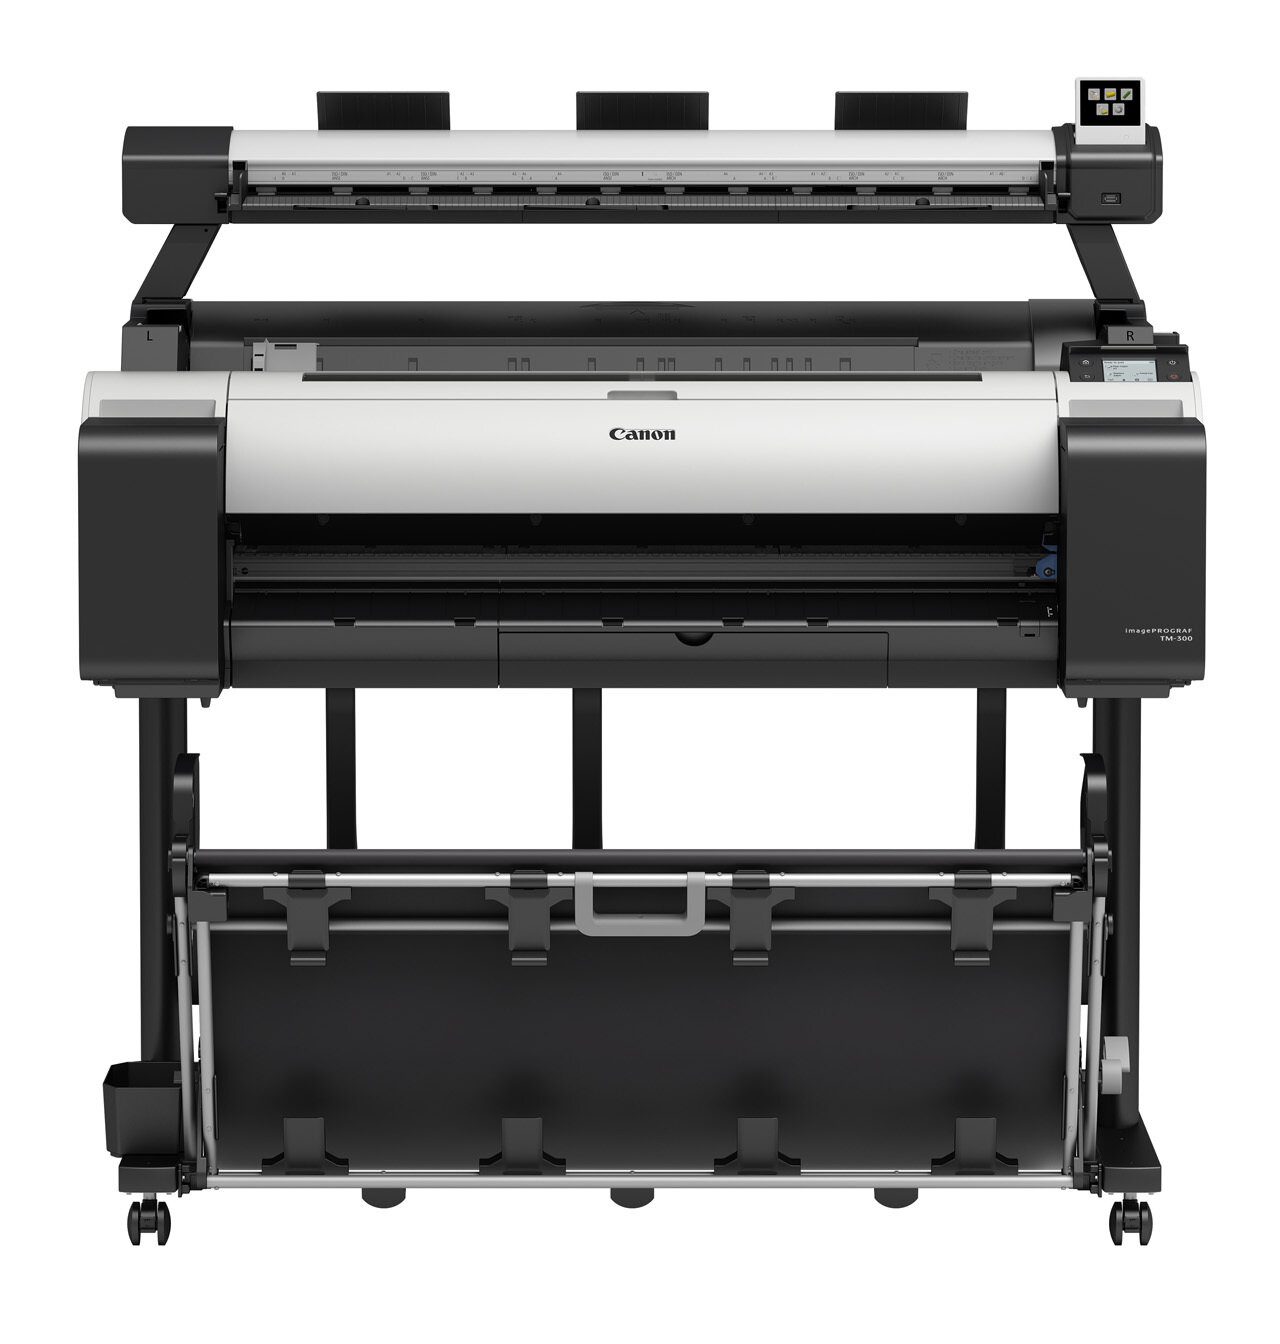 IPFTM-300 36" 5 COLOUR GRAPHICS LARGE PRINTER FORMAT WITH STAND LEI36 SCANNER